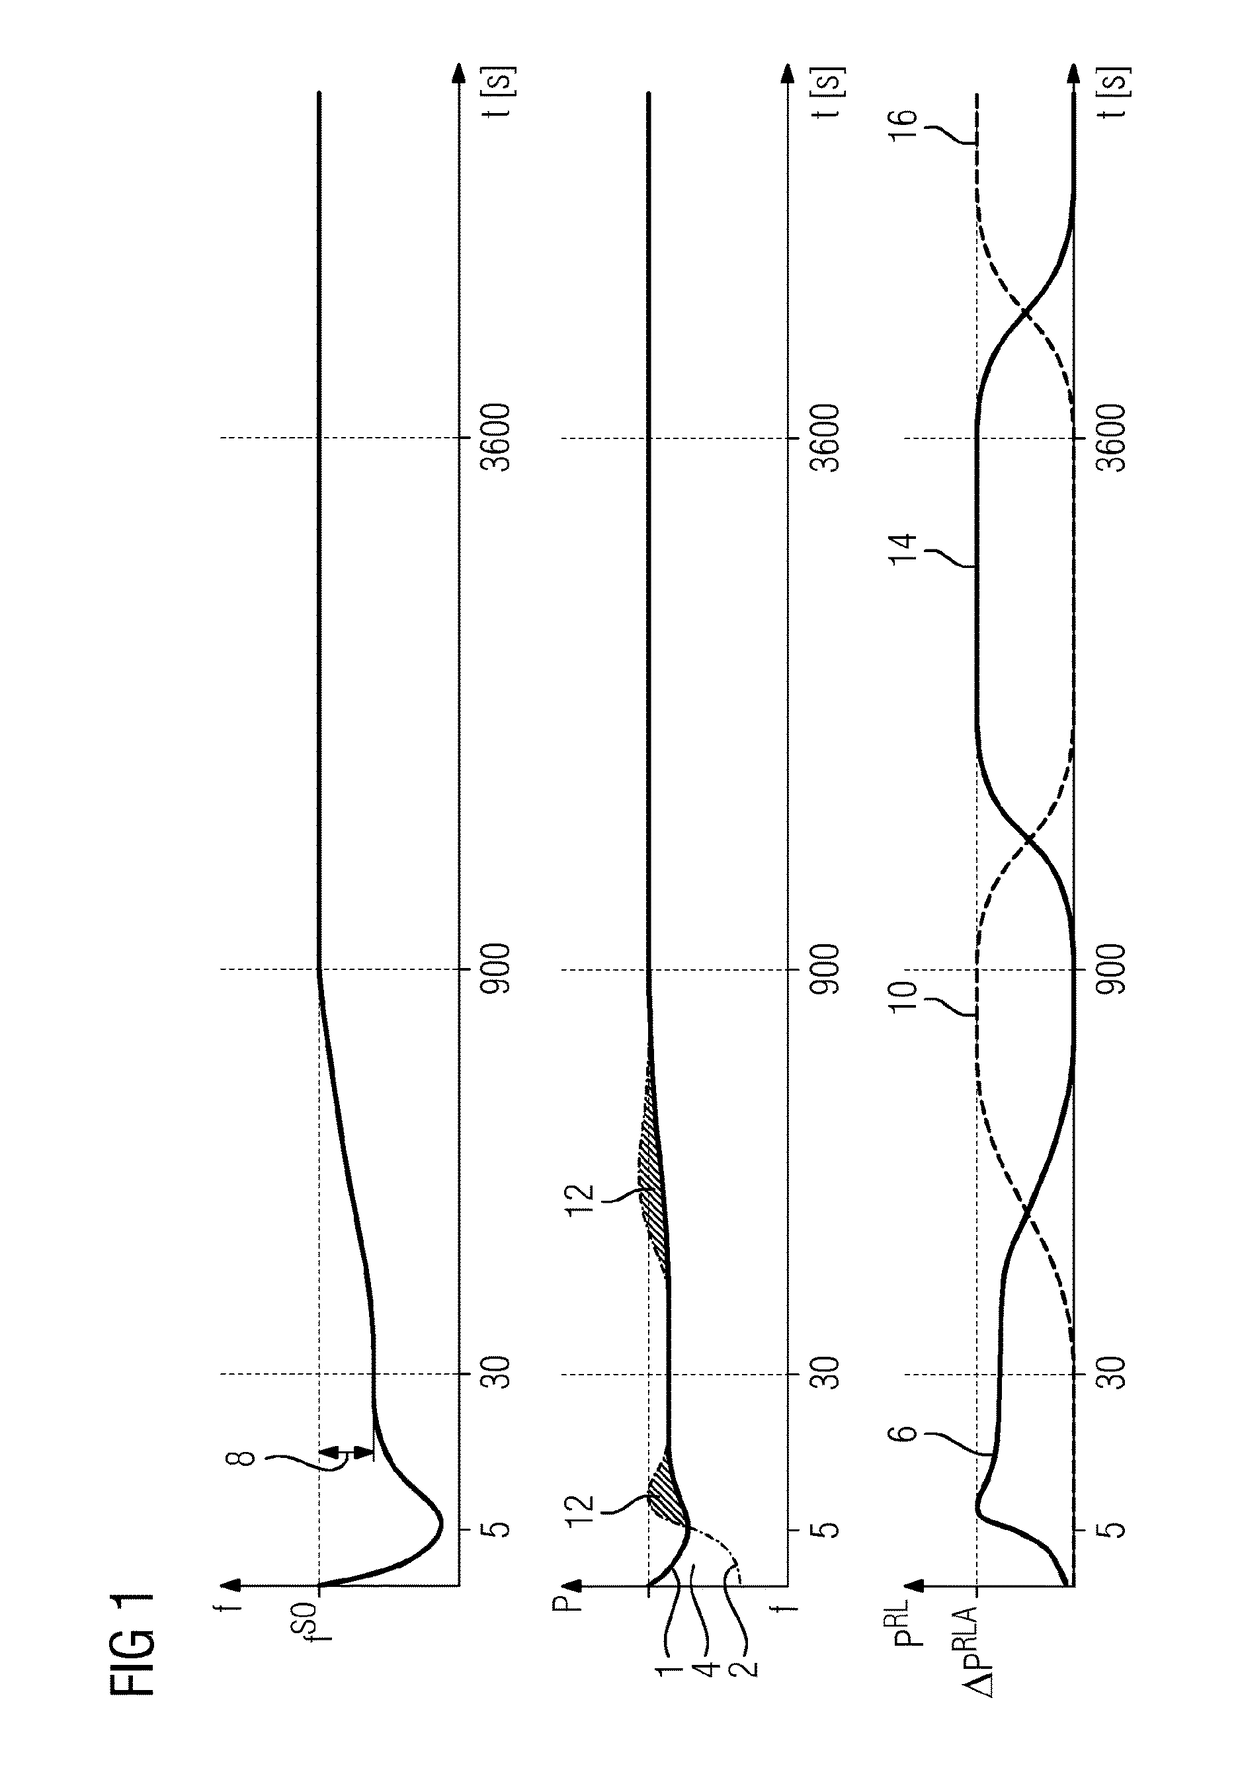 Method for operating a steam turbine plant